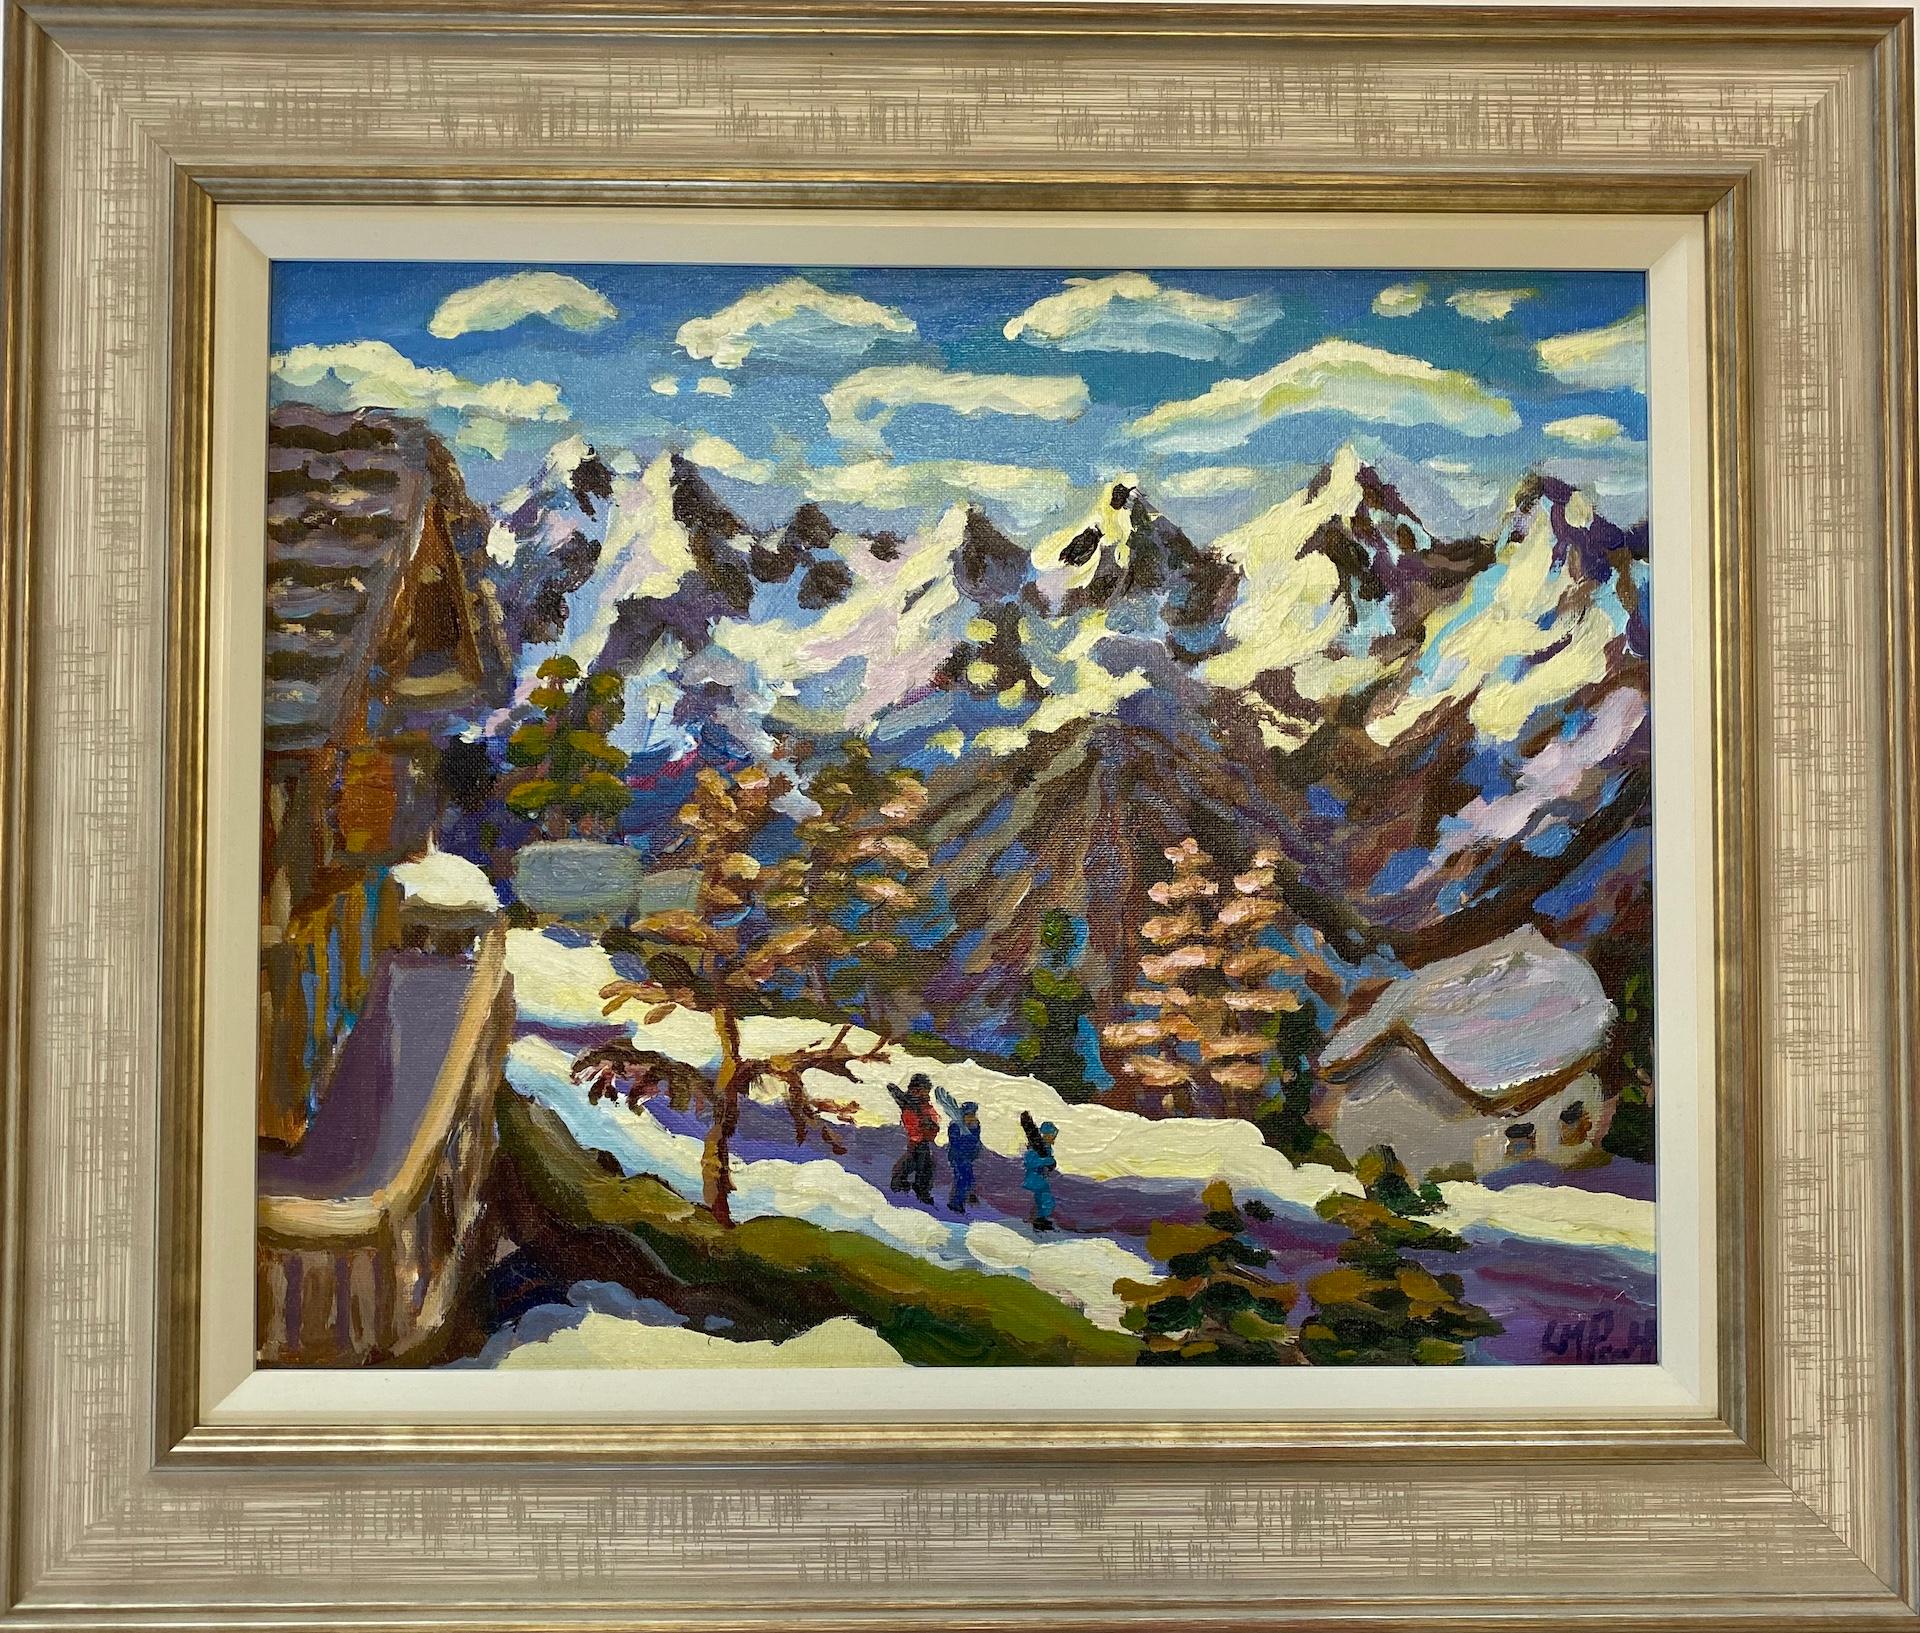 Lucy Pratt
Blue Lit Mountain Nendaz
OriginalLandscape Painting
Oil on Canvas
Canvas Size: H 38cm x W 48cm
Framed Size: H 56cm x W 66 x D 3cm
Solf Framed
(Please note that in situ images are purely an indication of how a piece may look).

This